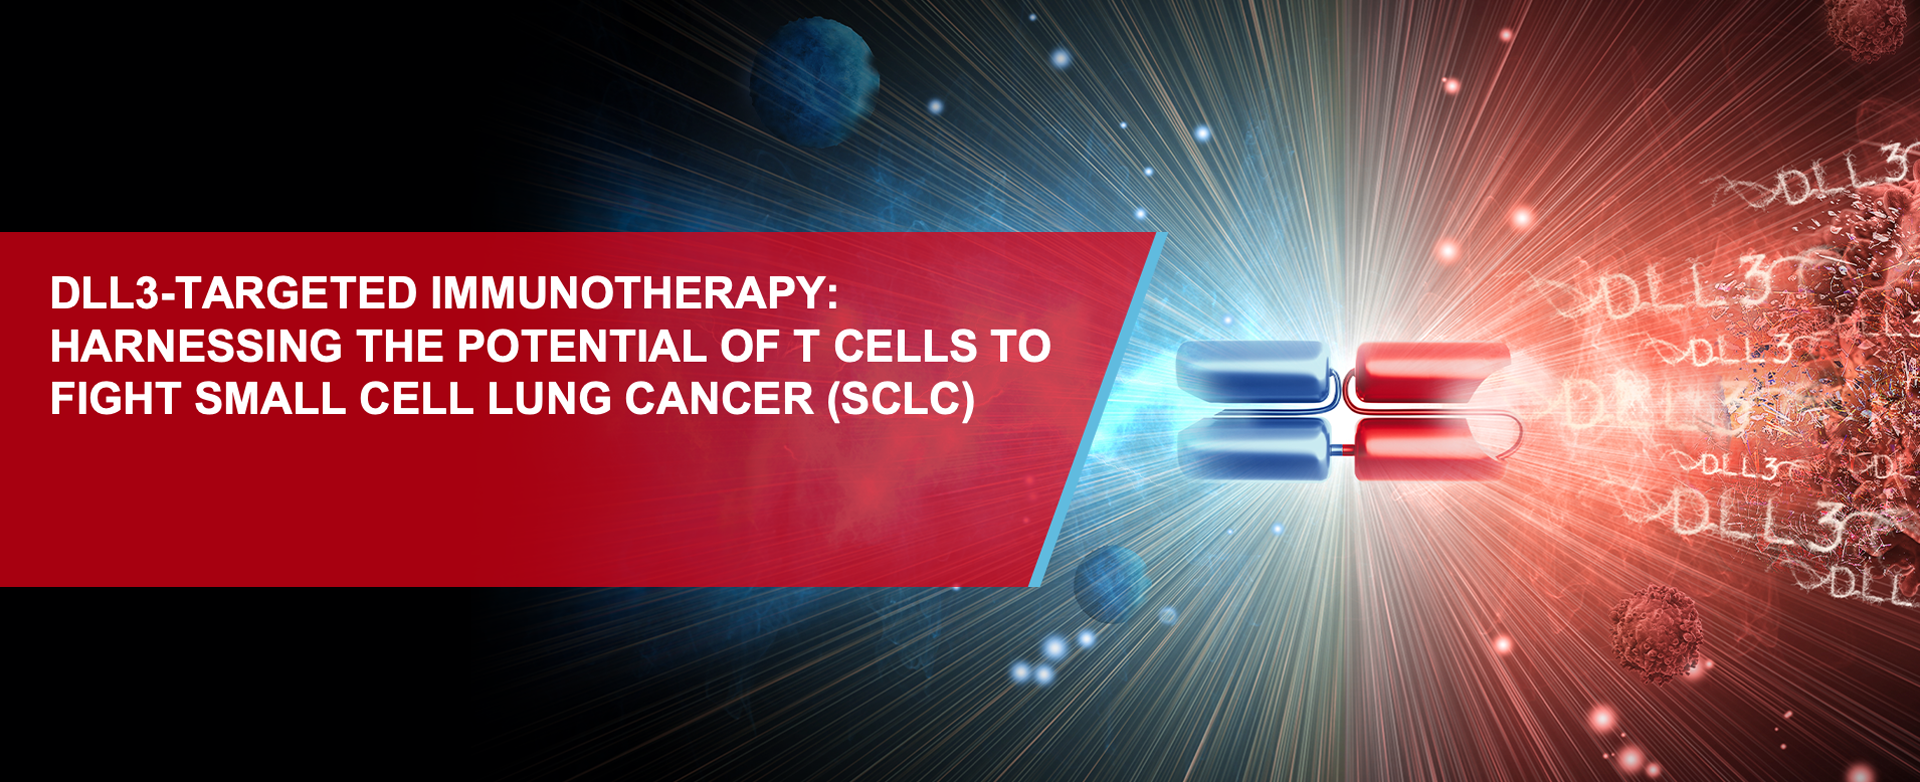 Download medical disease case study about harnessing the potential of T Cells in SCLC